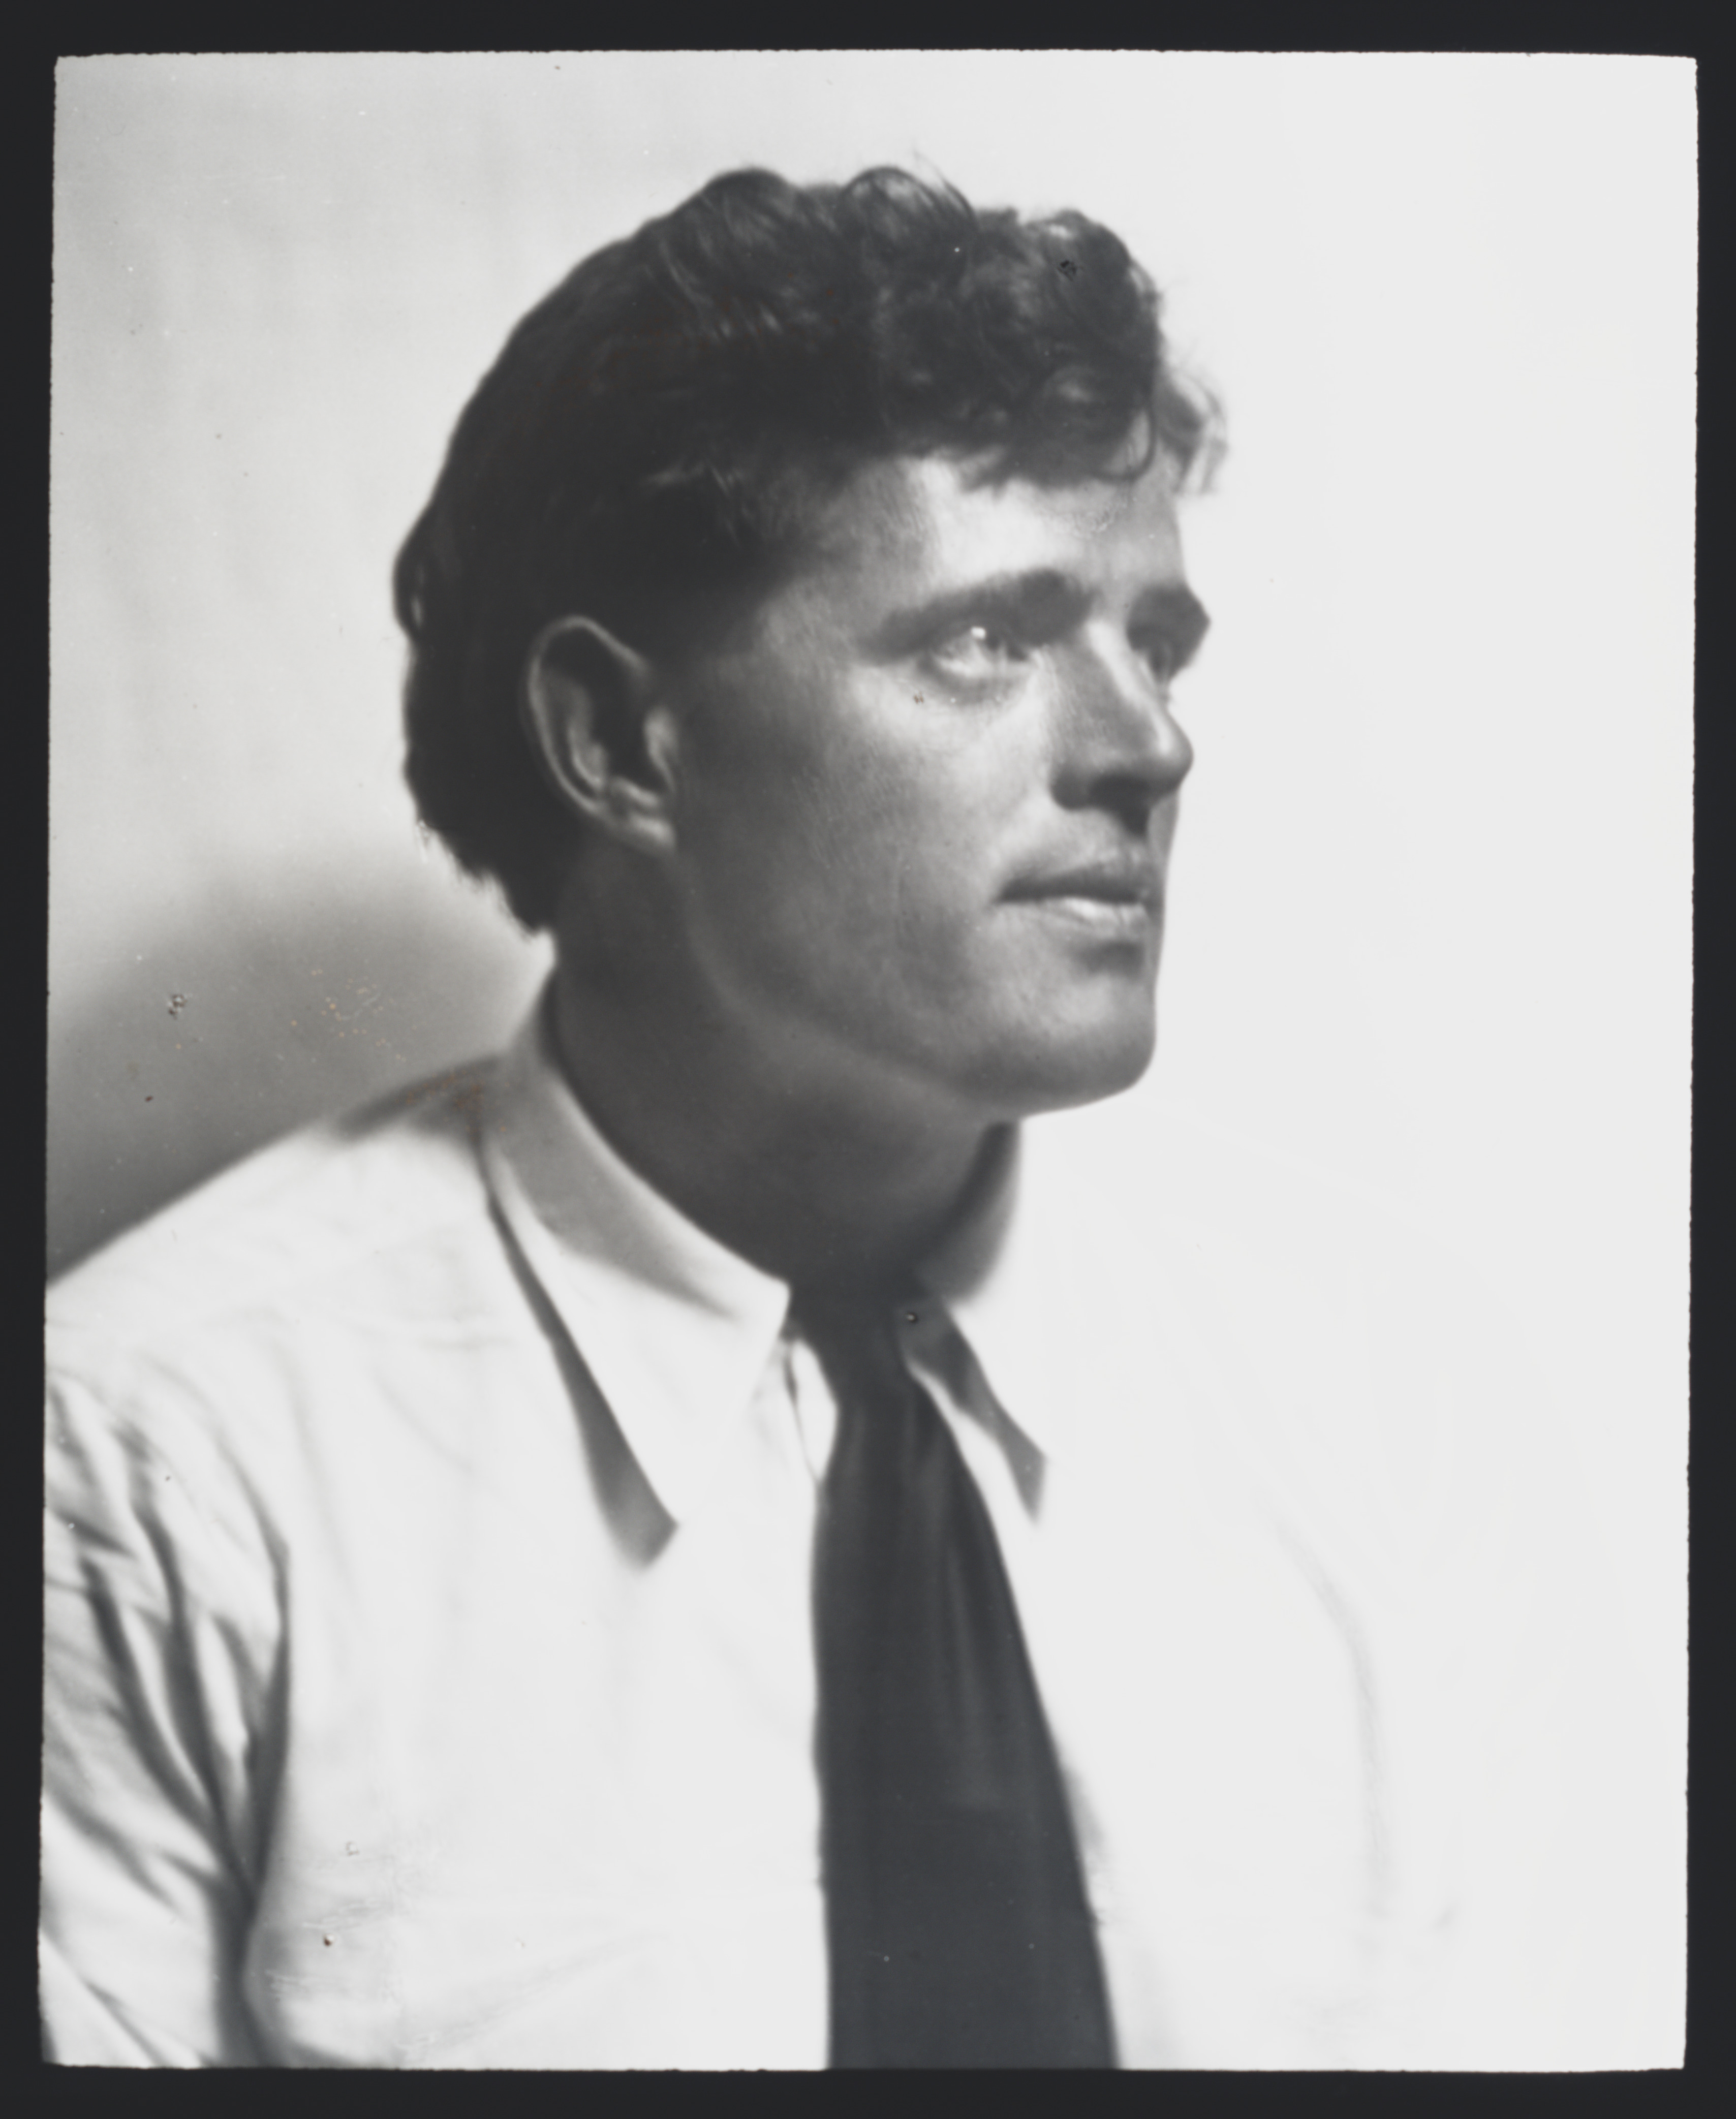 Portrait photograph of Jack London by Arnold Genthe, taken from a negative taken between 1906 and 1916.